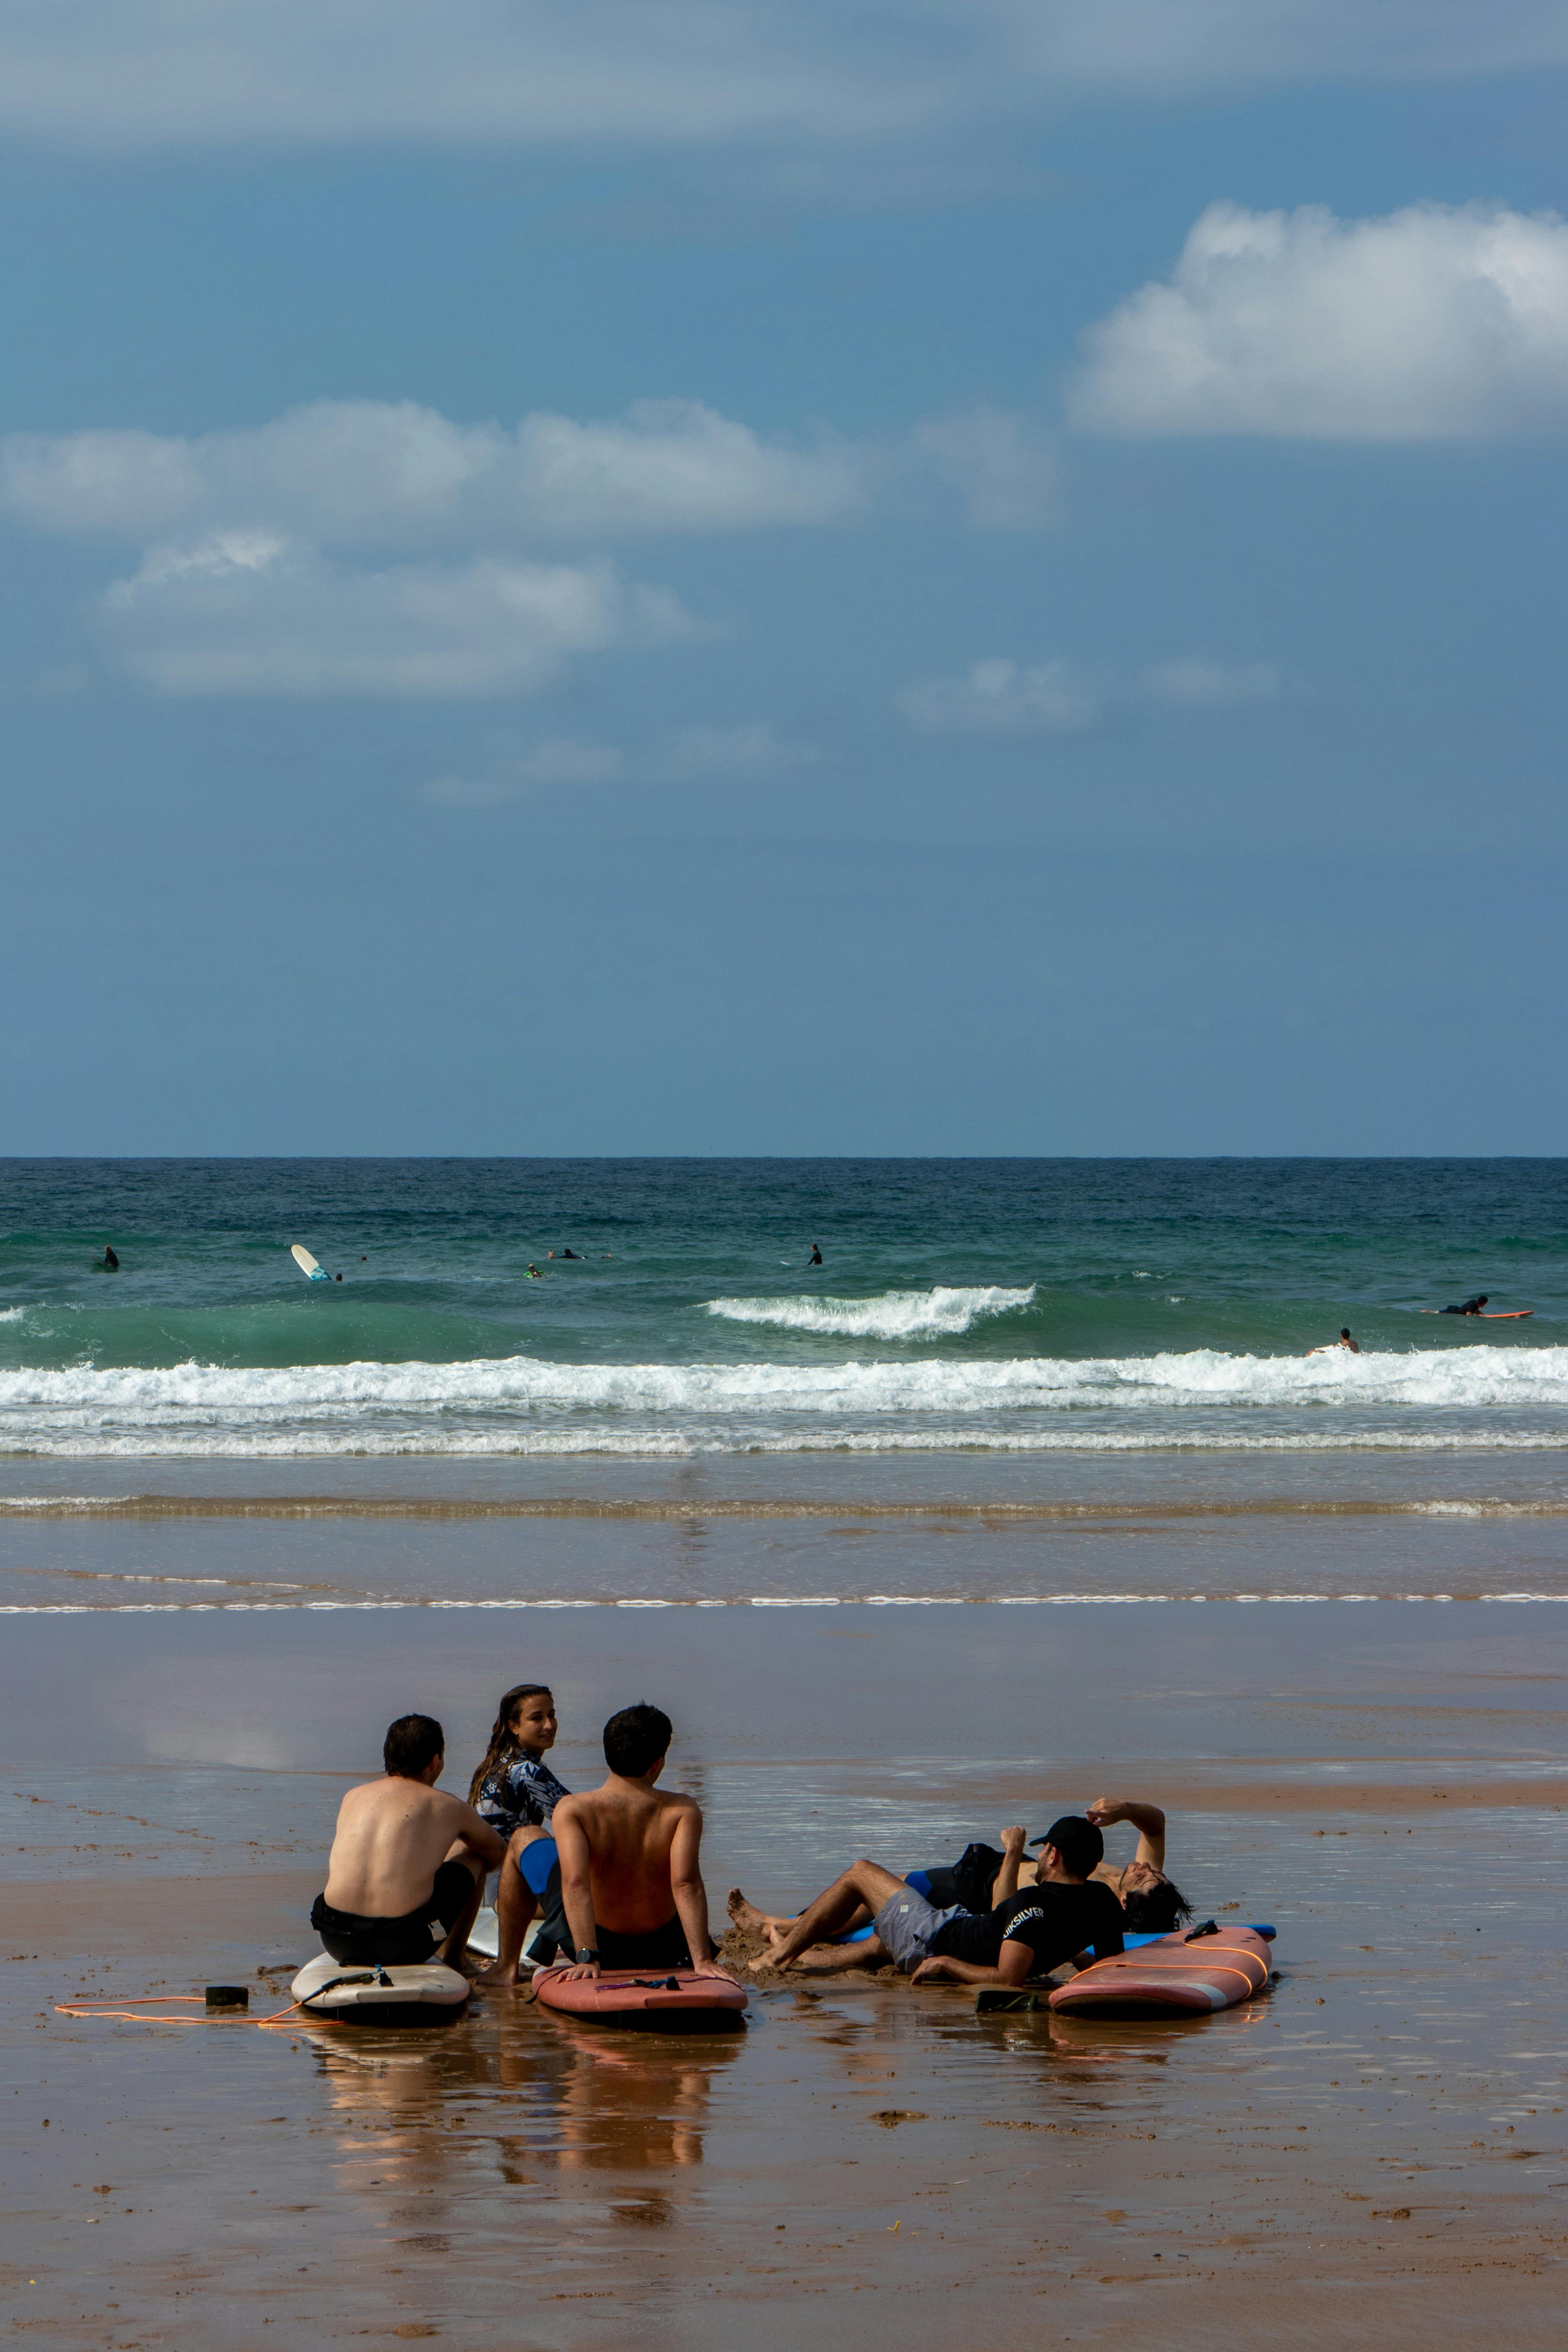 Surfers at the beach